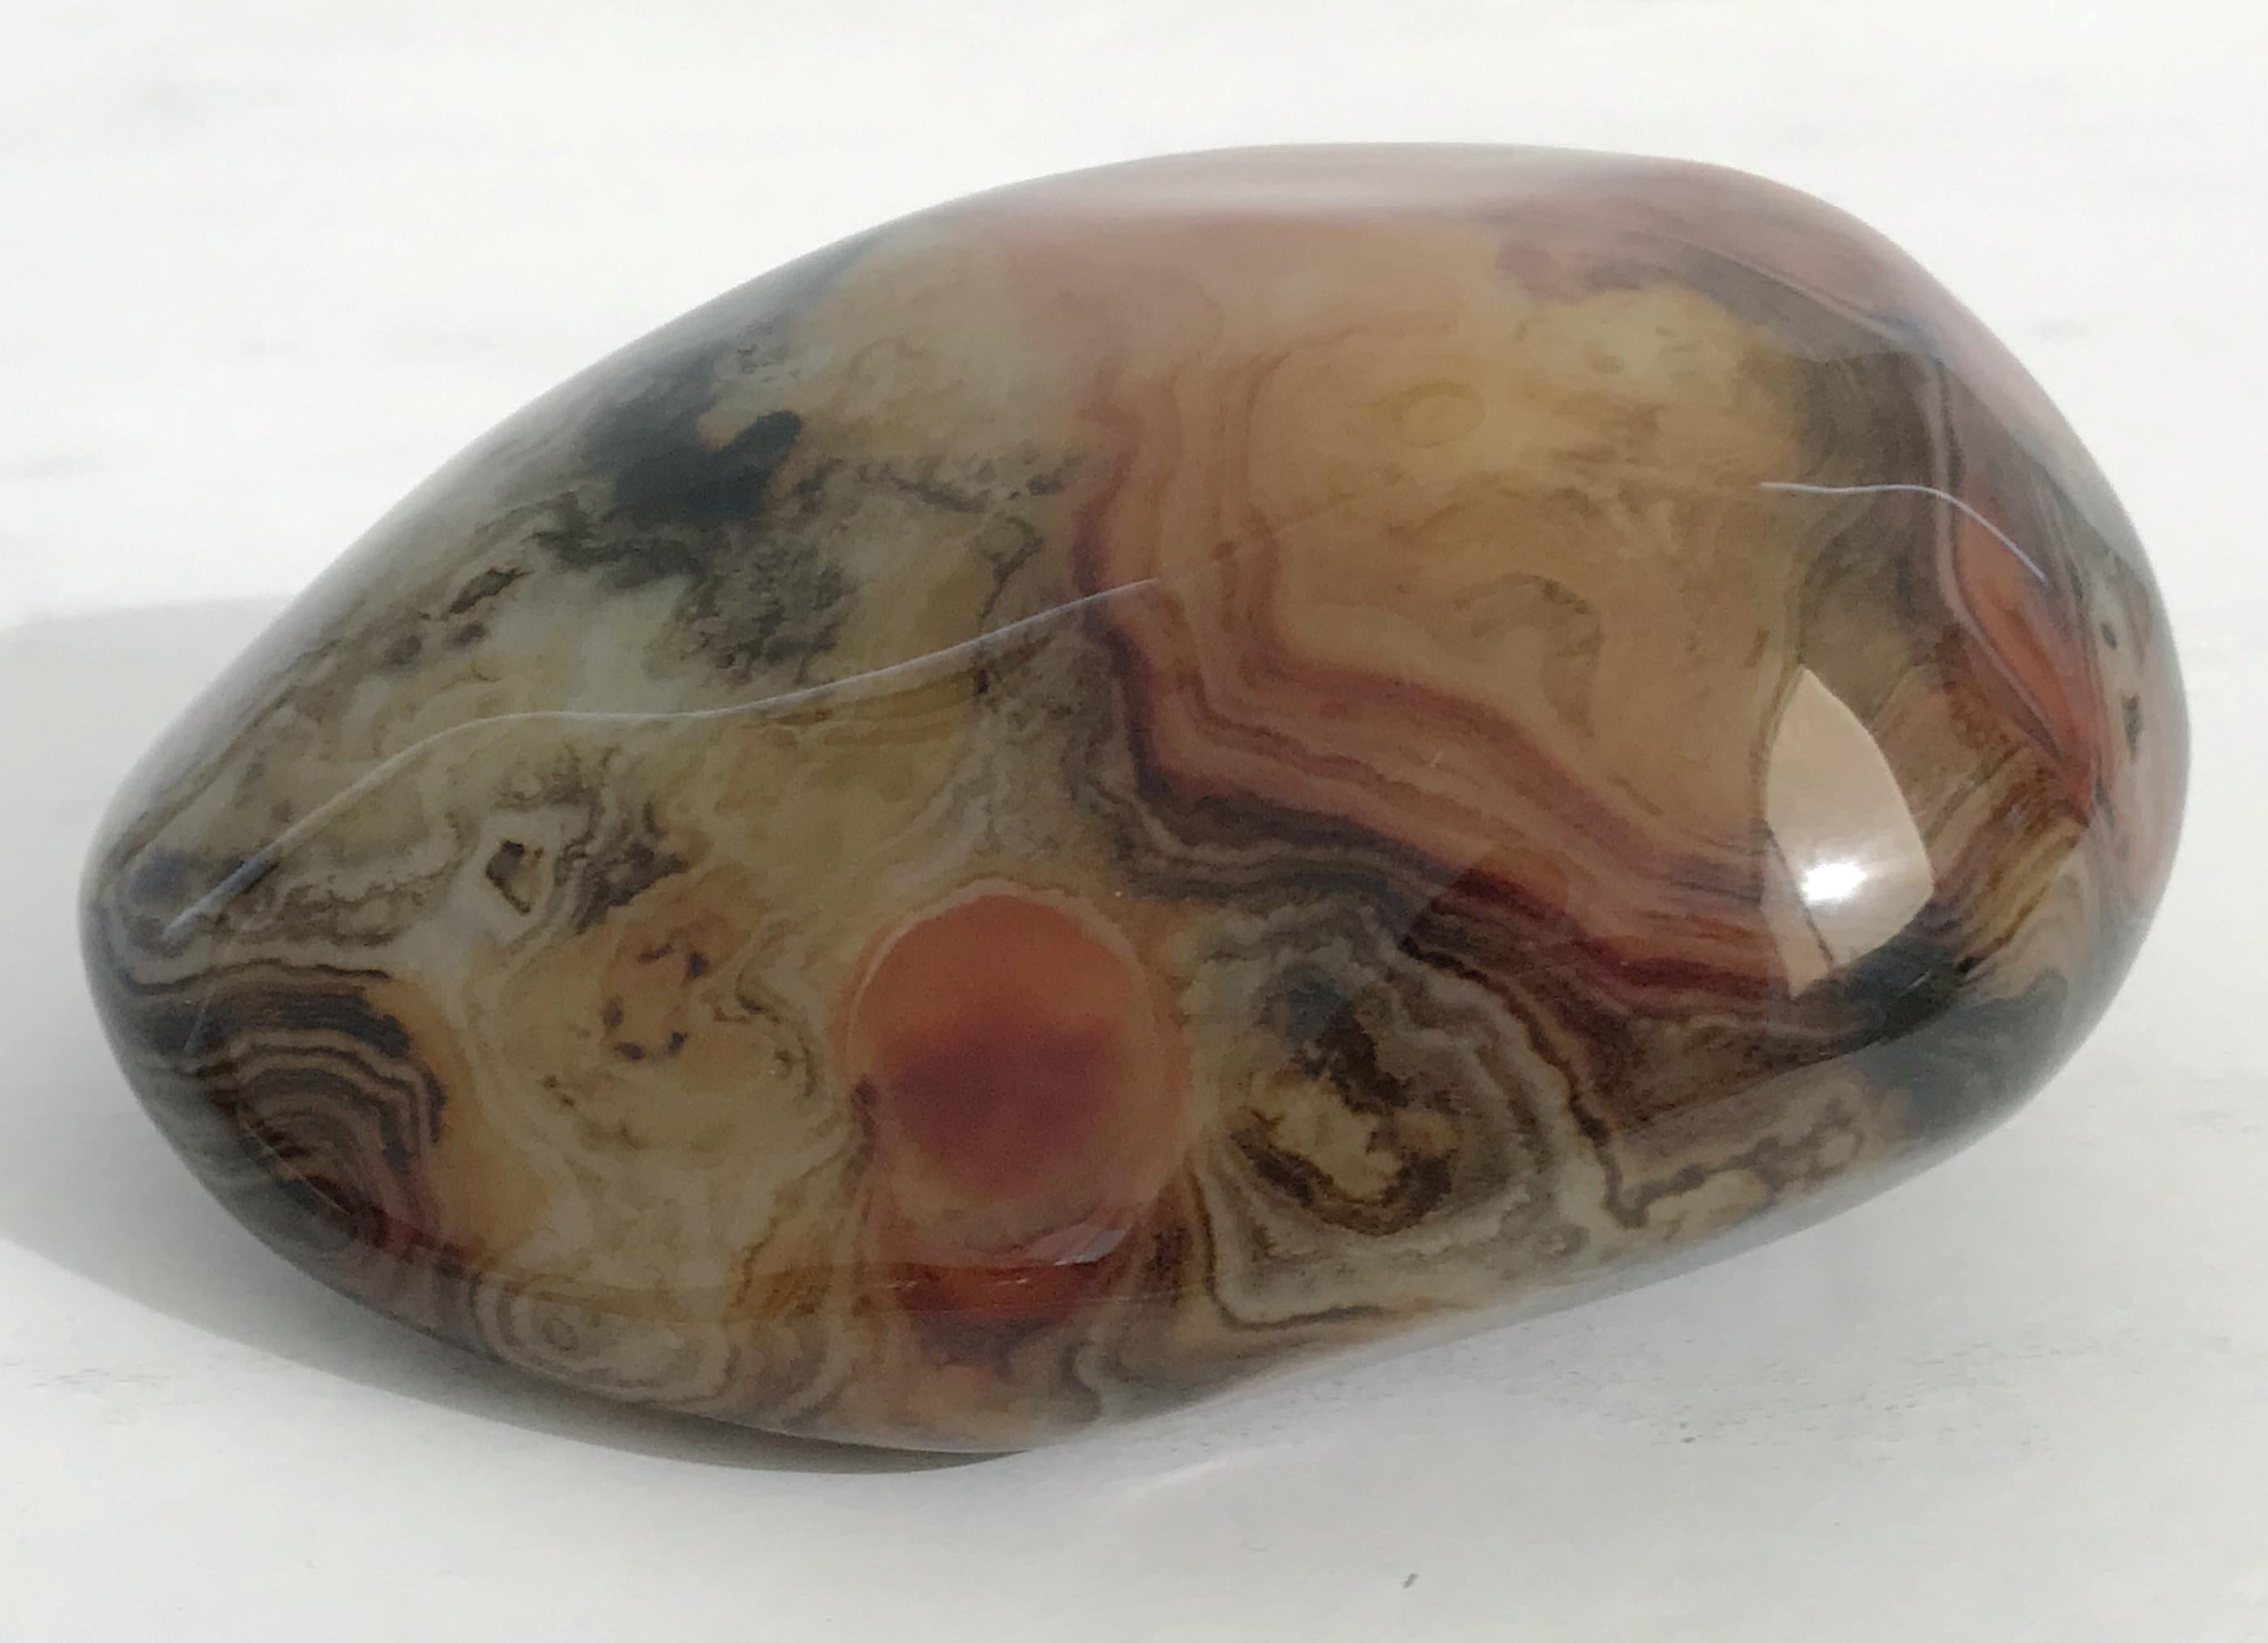 Hand polished agate onyx stone paperweight in black, brown, and red intricate layered patterns
Measures: length 5 inches, width 4 inches, height 2.25 inch
1 in stock in Palm Springs ON 50% OFF SALE for $225 !!
This piece makes for a great and unique